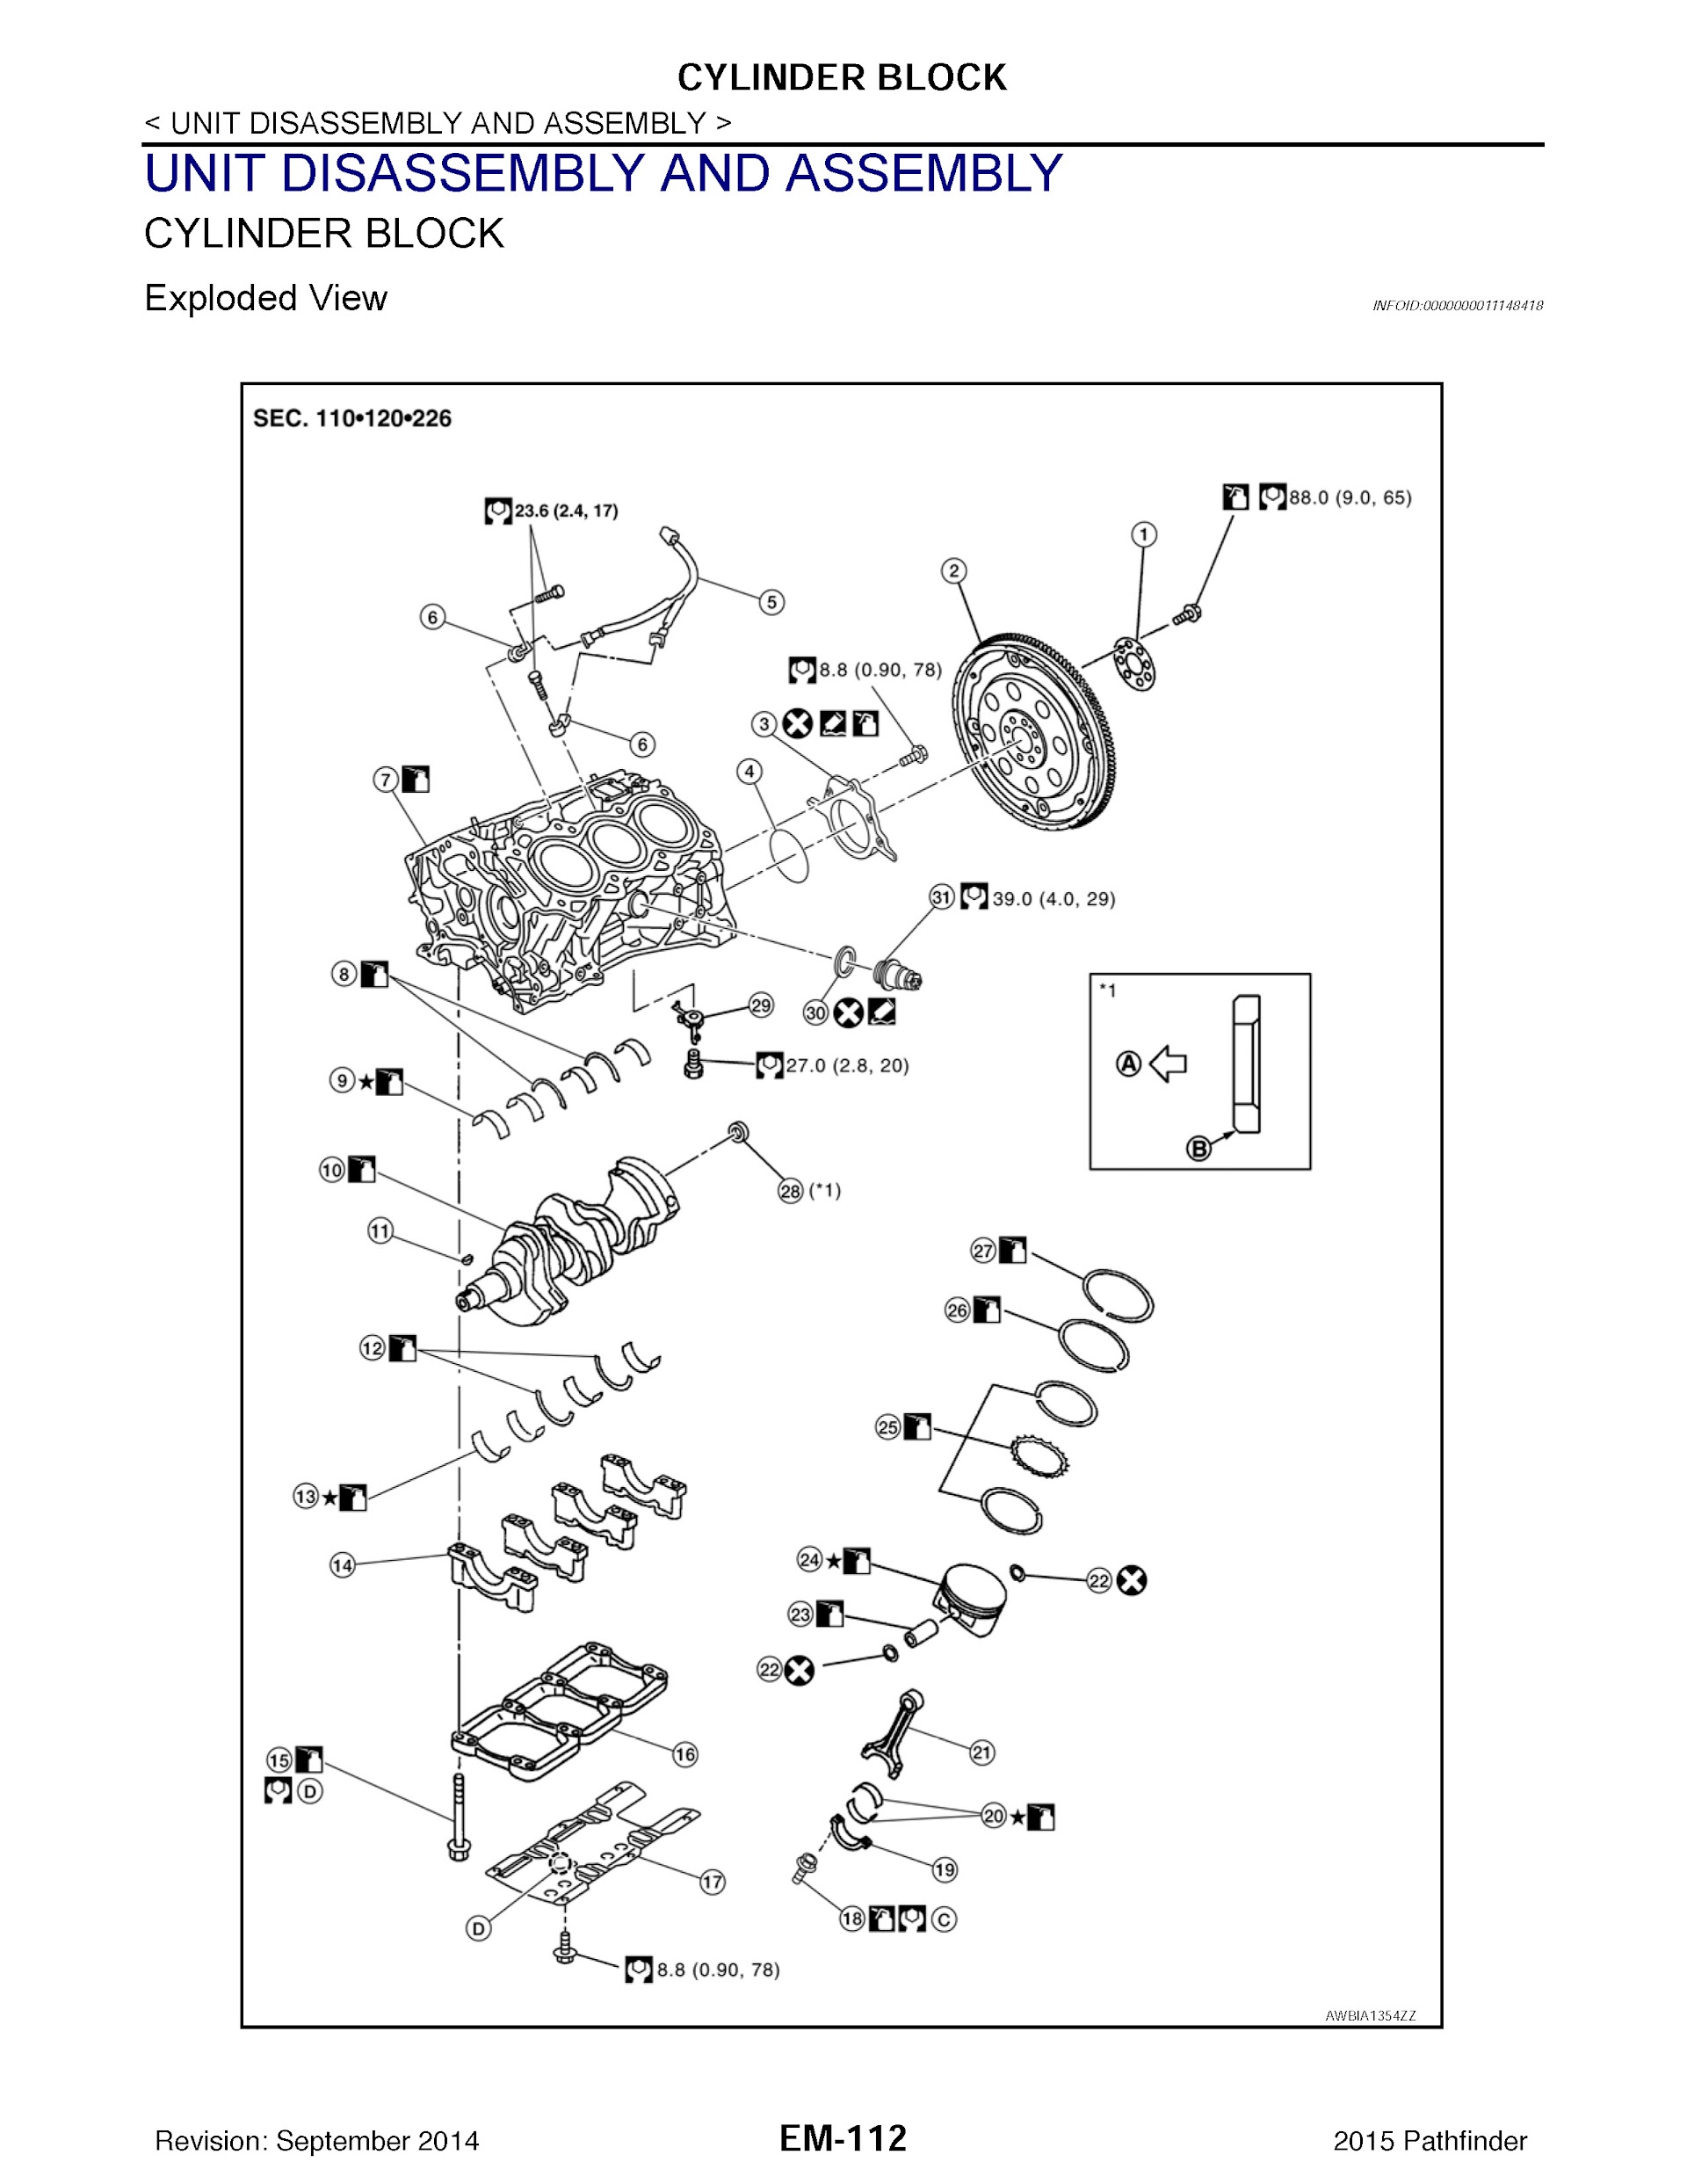 2015 Nissan Pathfinder Repair Manual, Cylinder Head Assembly and Disassembly